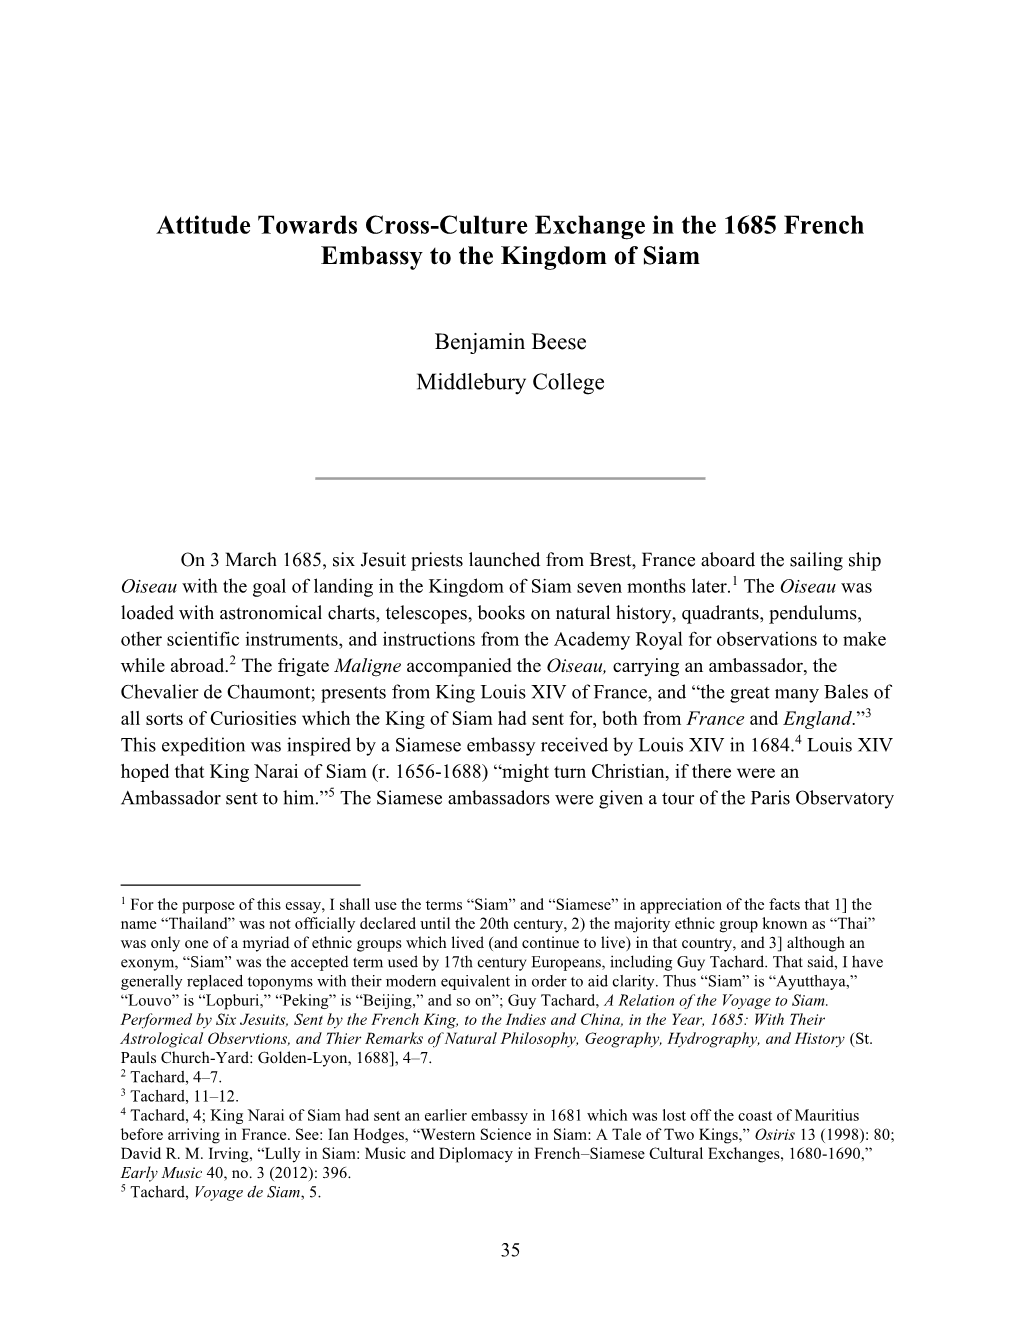 Attitude Towards Cross-Culture Exchange in the 1685 French Embassy to the Kingdom of Siam